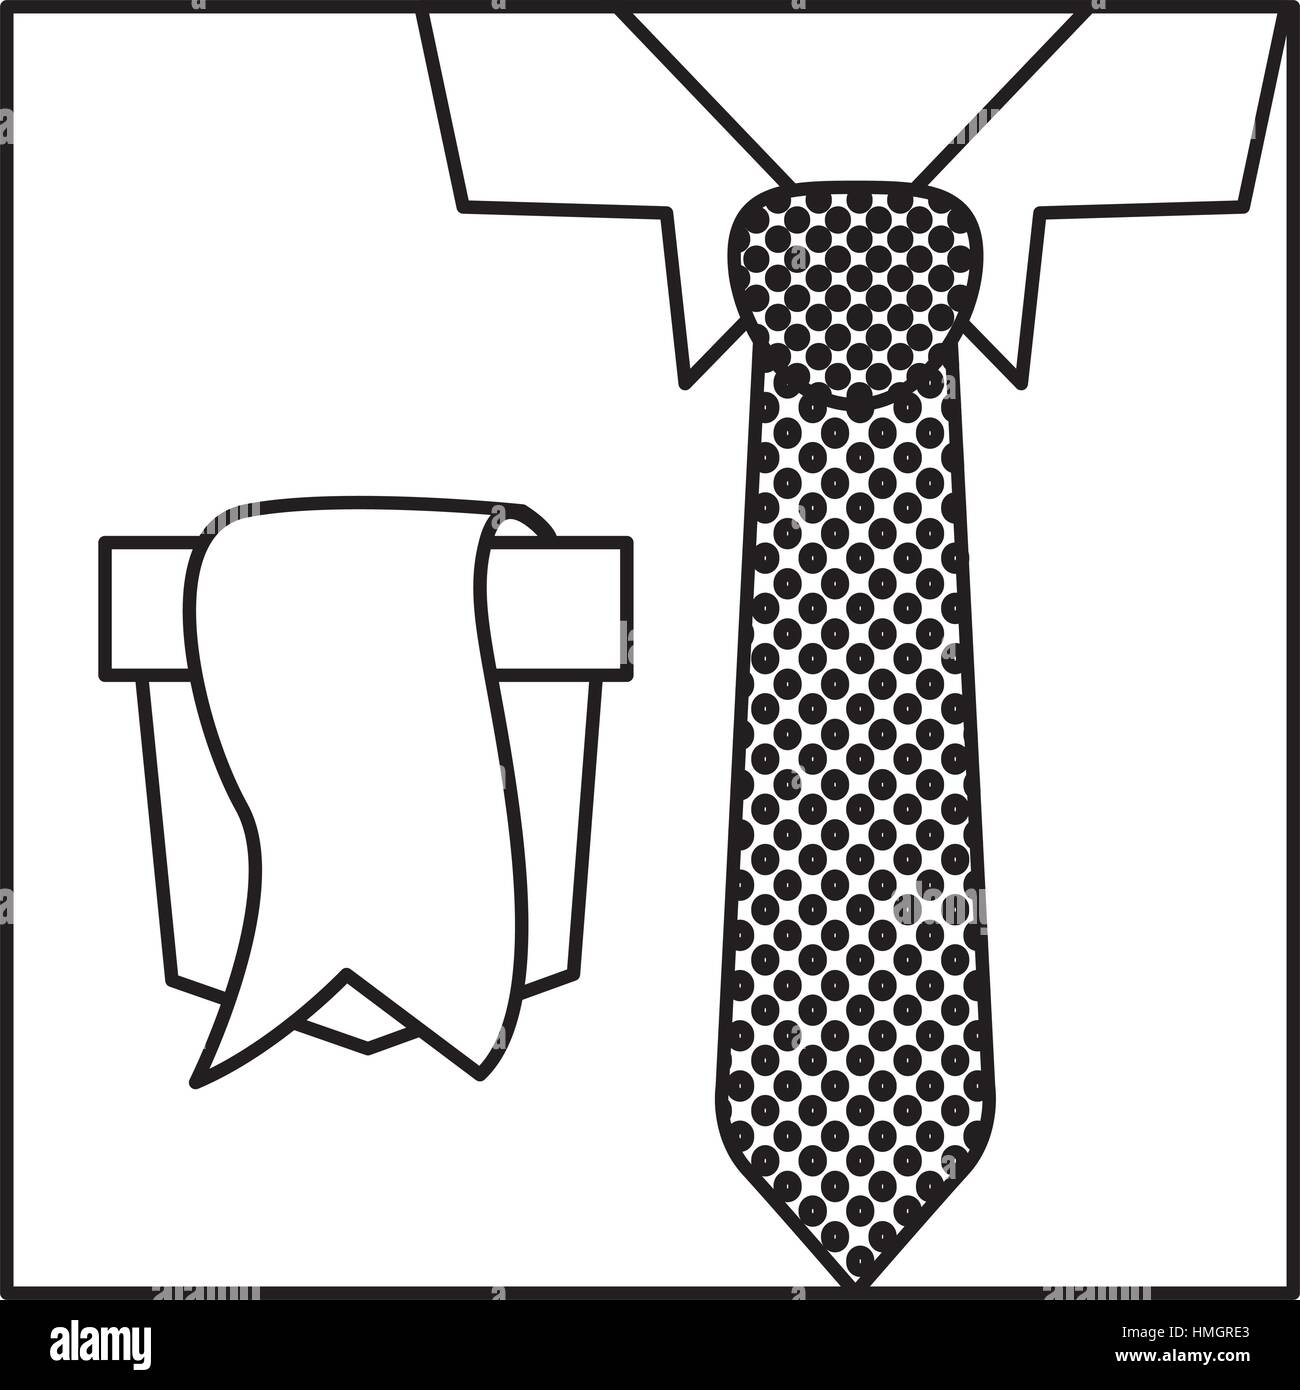 square border silhouette with close up formal shirt with dotted necktie and label in pocket Stock Vector